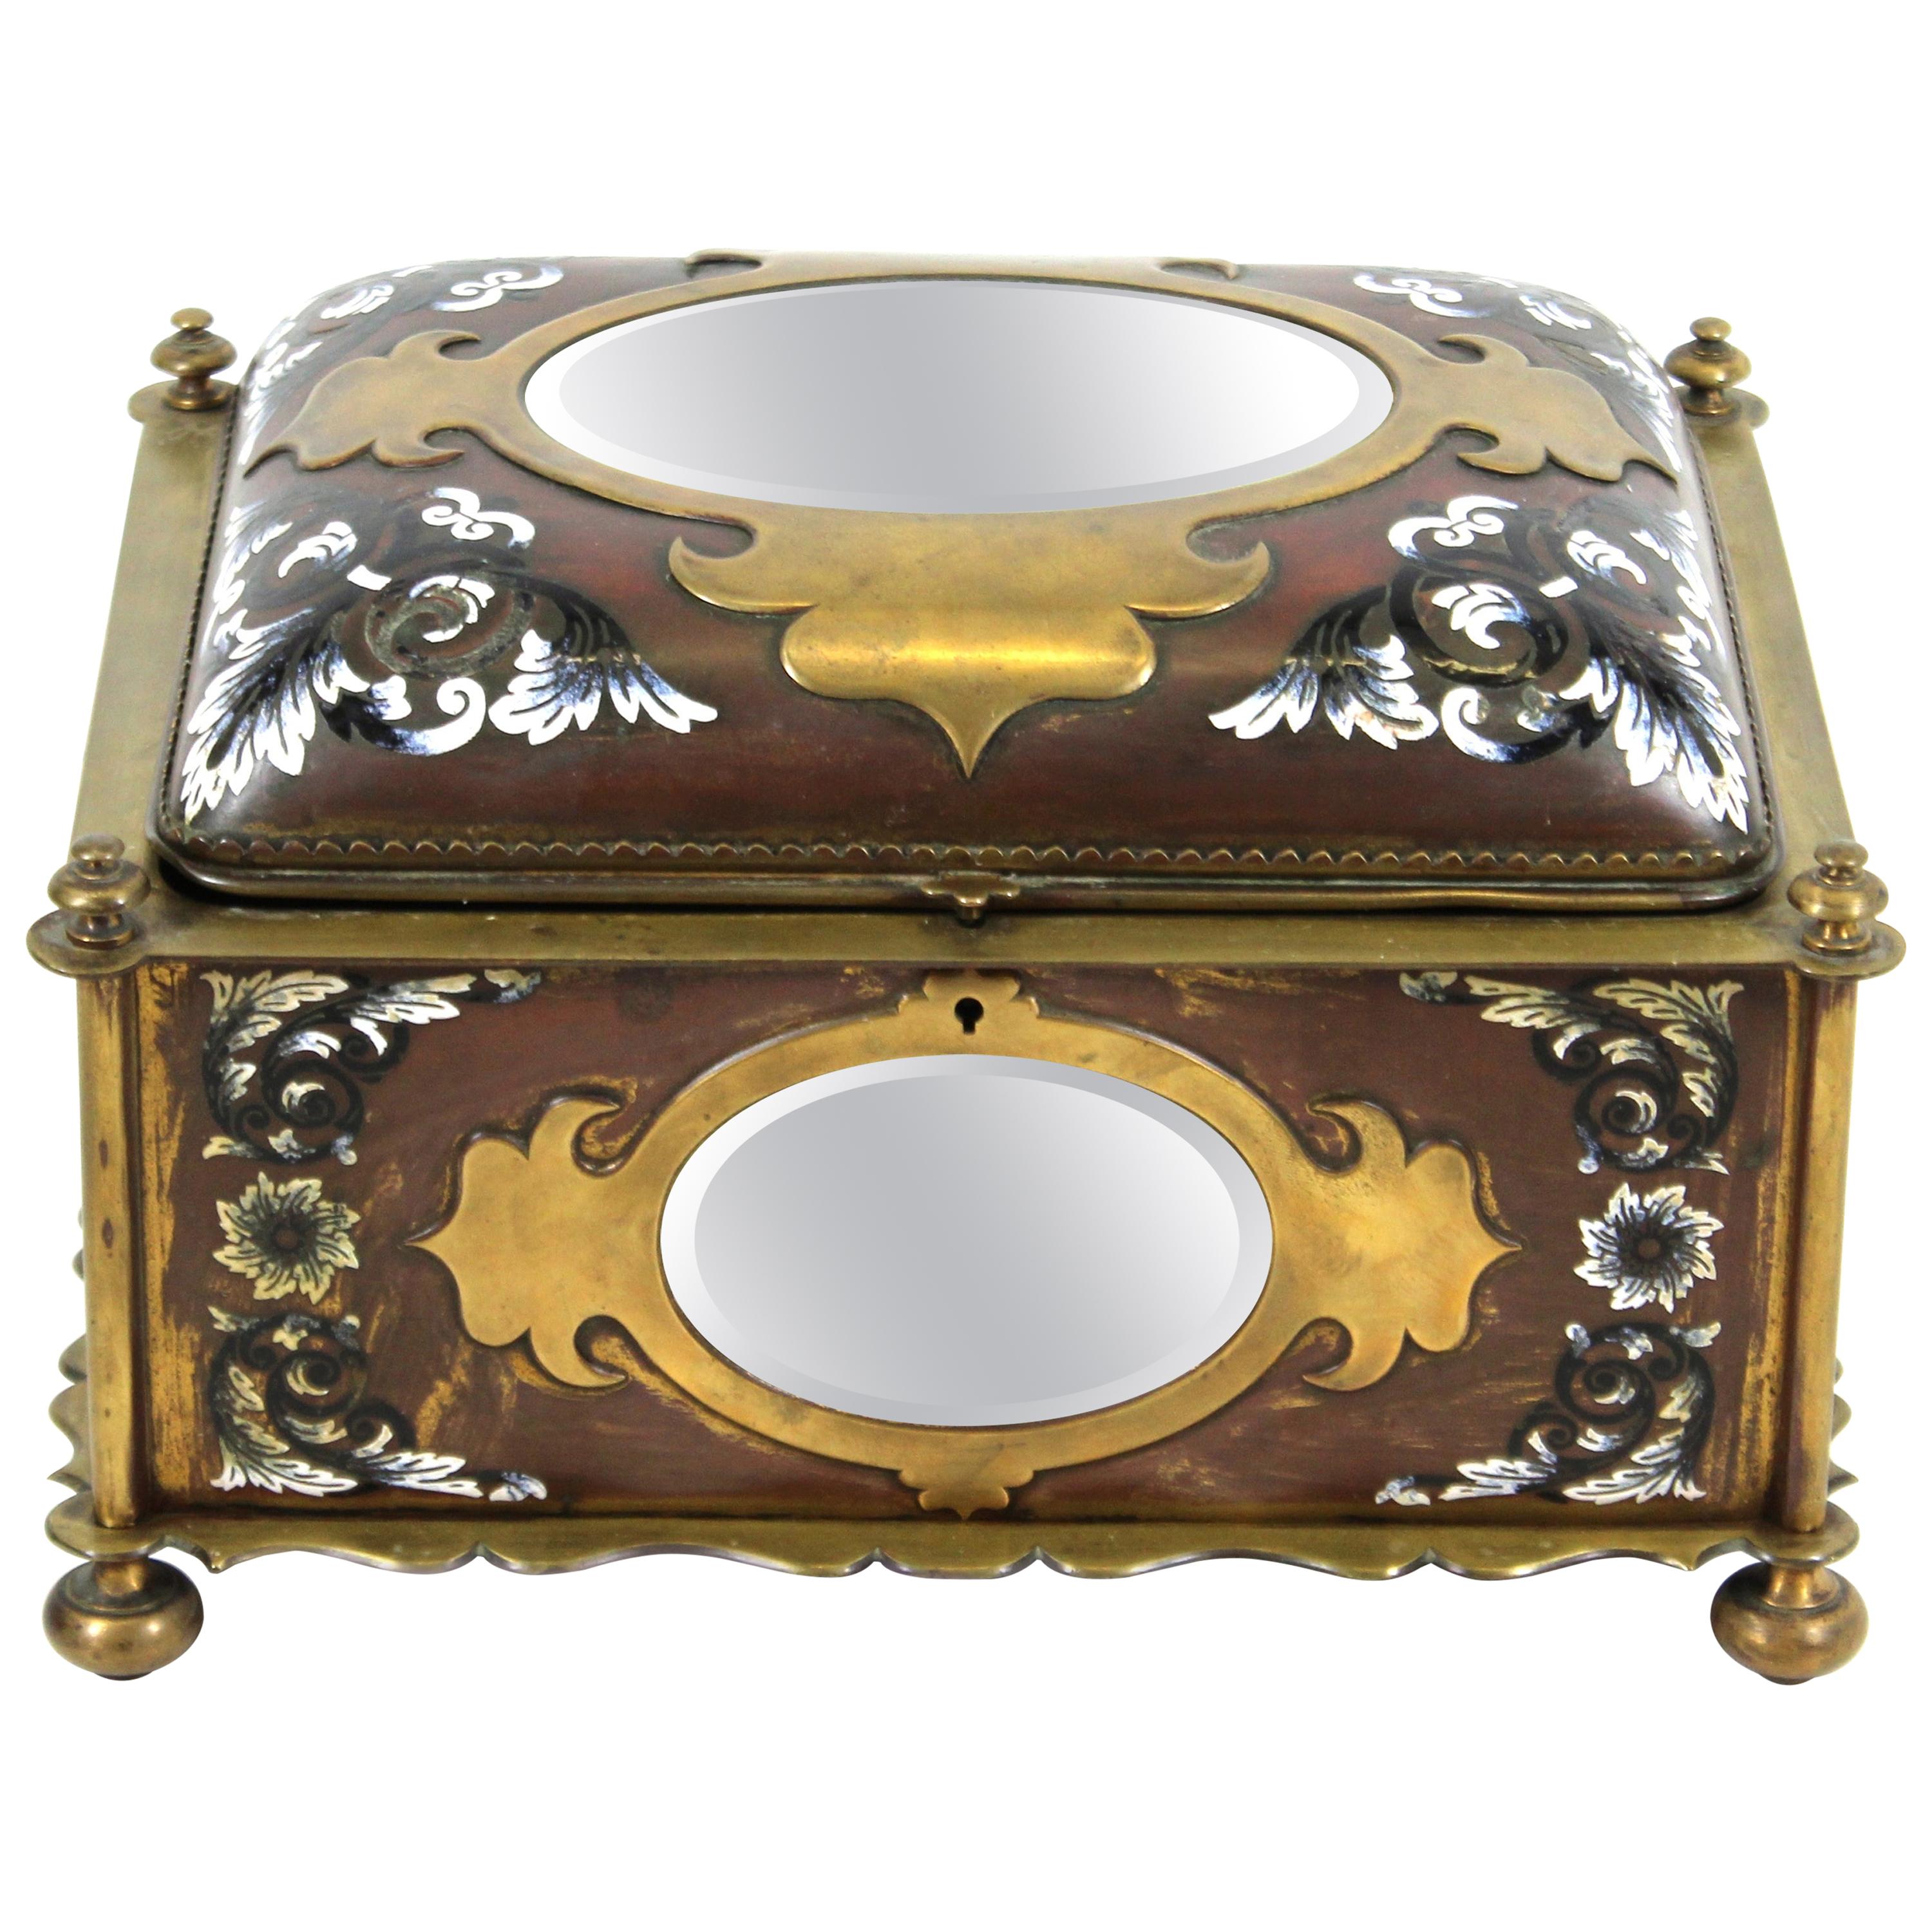 French Renaissance Revival Champleve Enamel Jewelry Box with Oval Mirror Inserts